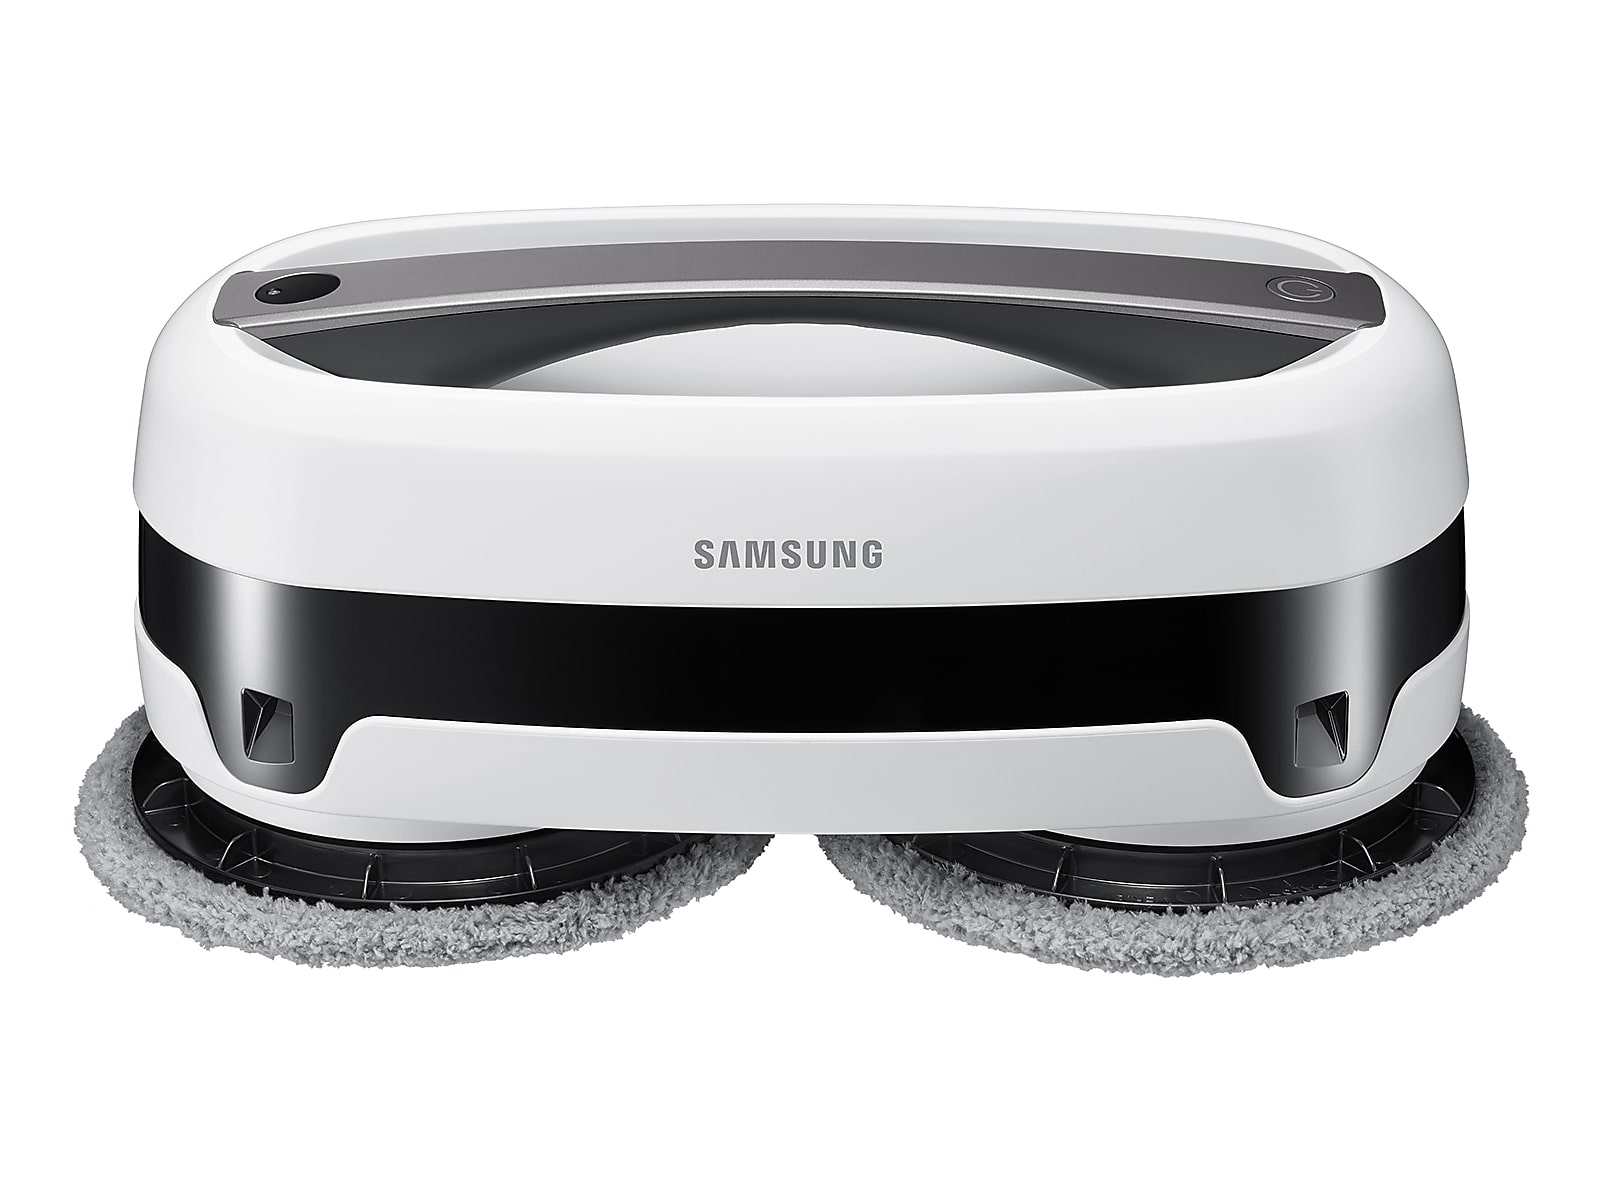 Samsung Jetbot Mop With Dual Spinning Technology In White(VR20T6001MW/AA)